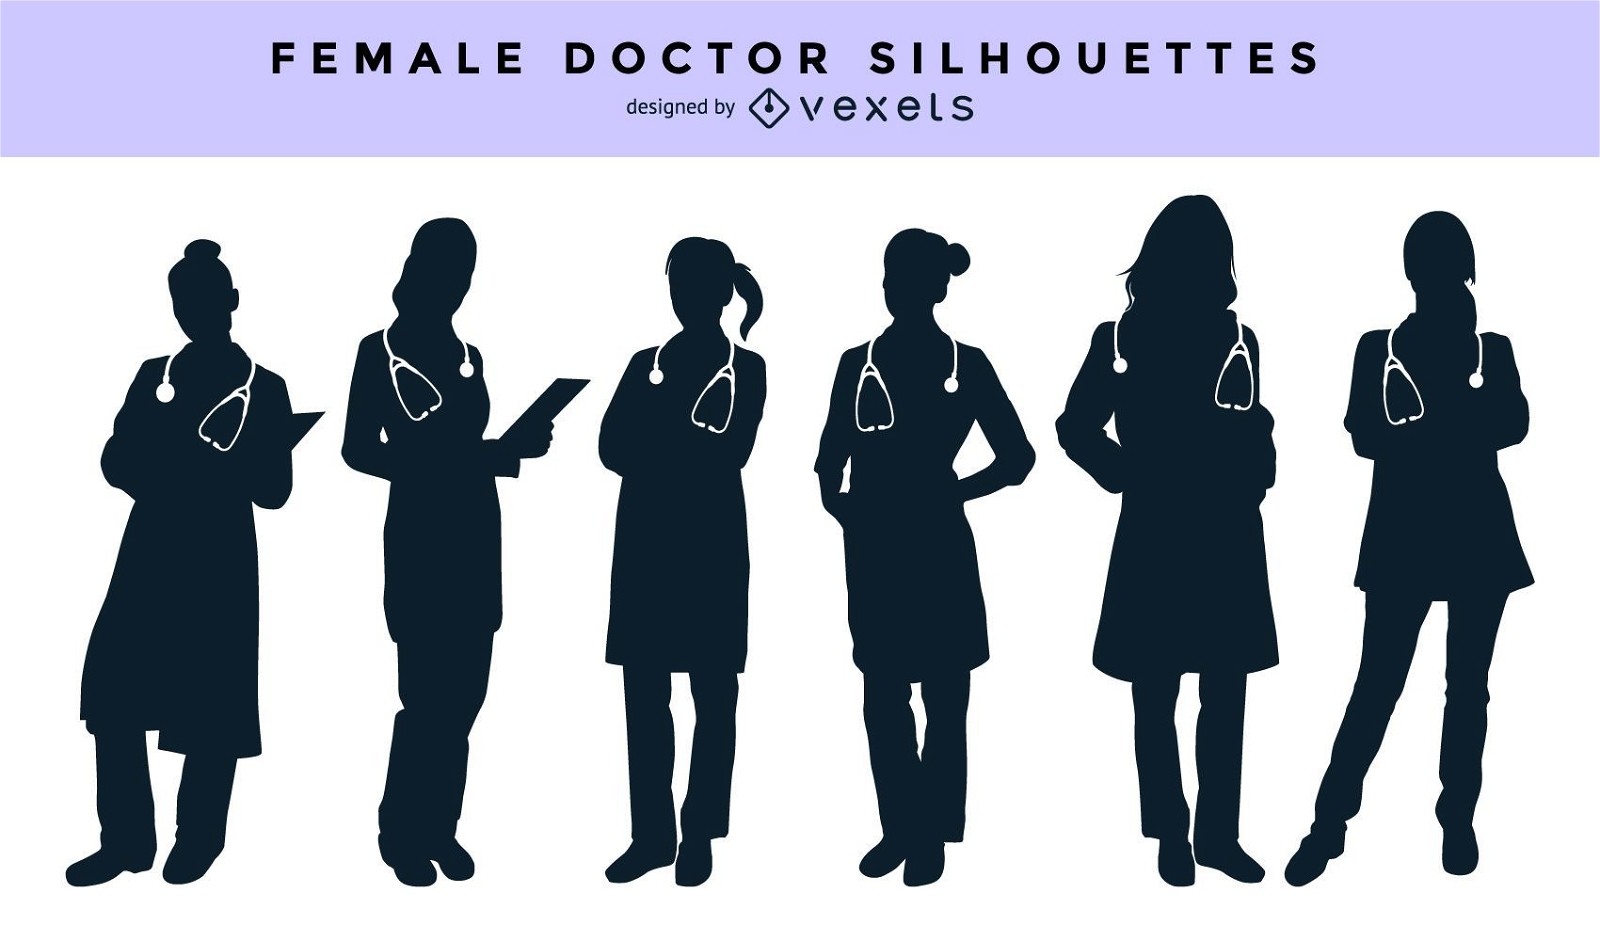 https://images.vexels.com/content/147507/preview/female-doctor-silhouette-set-5303e4.png